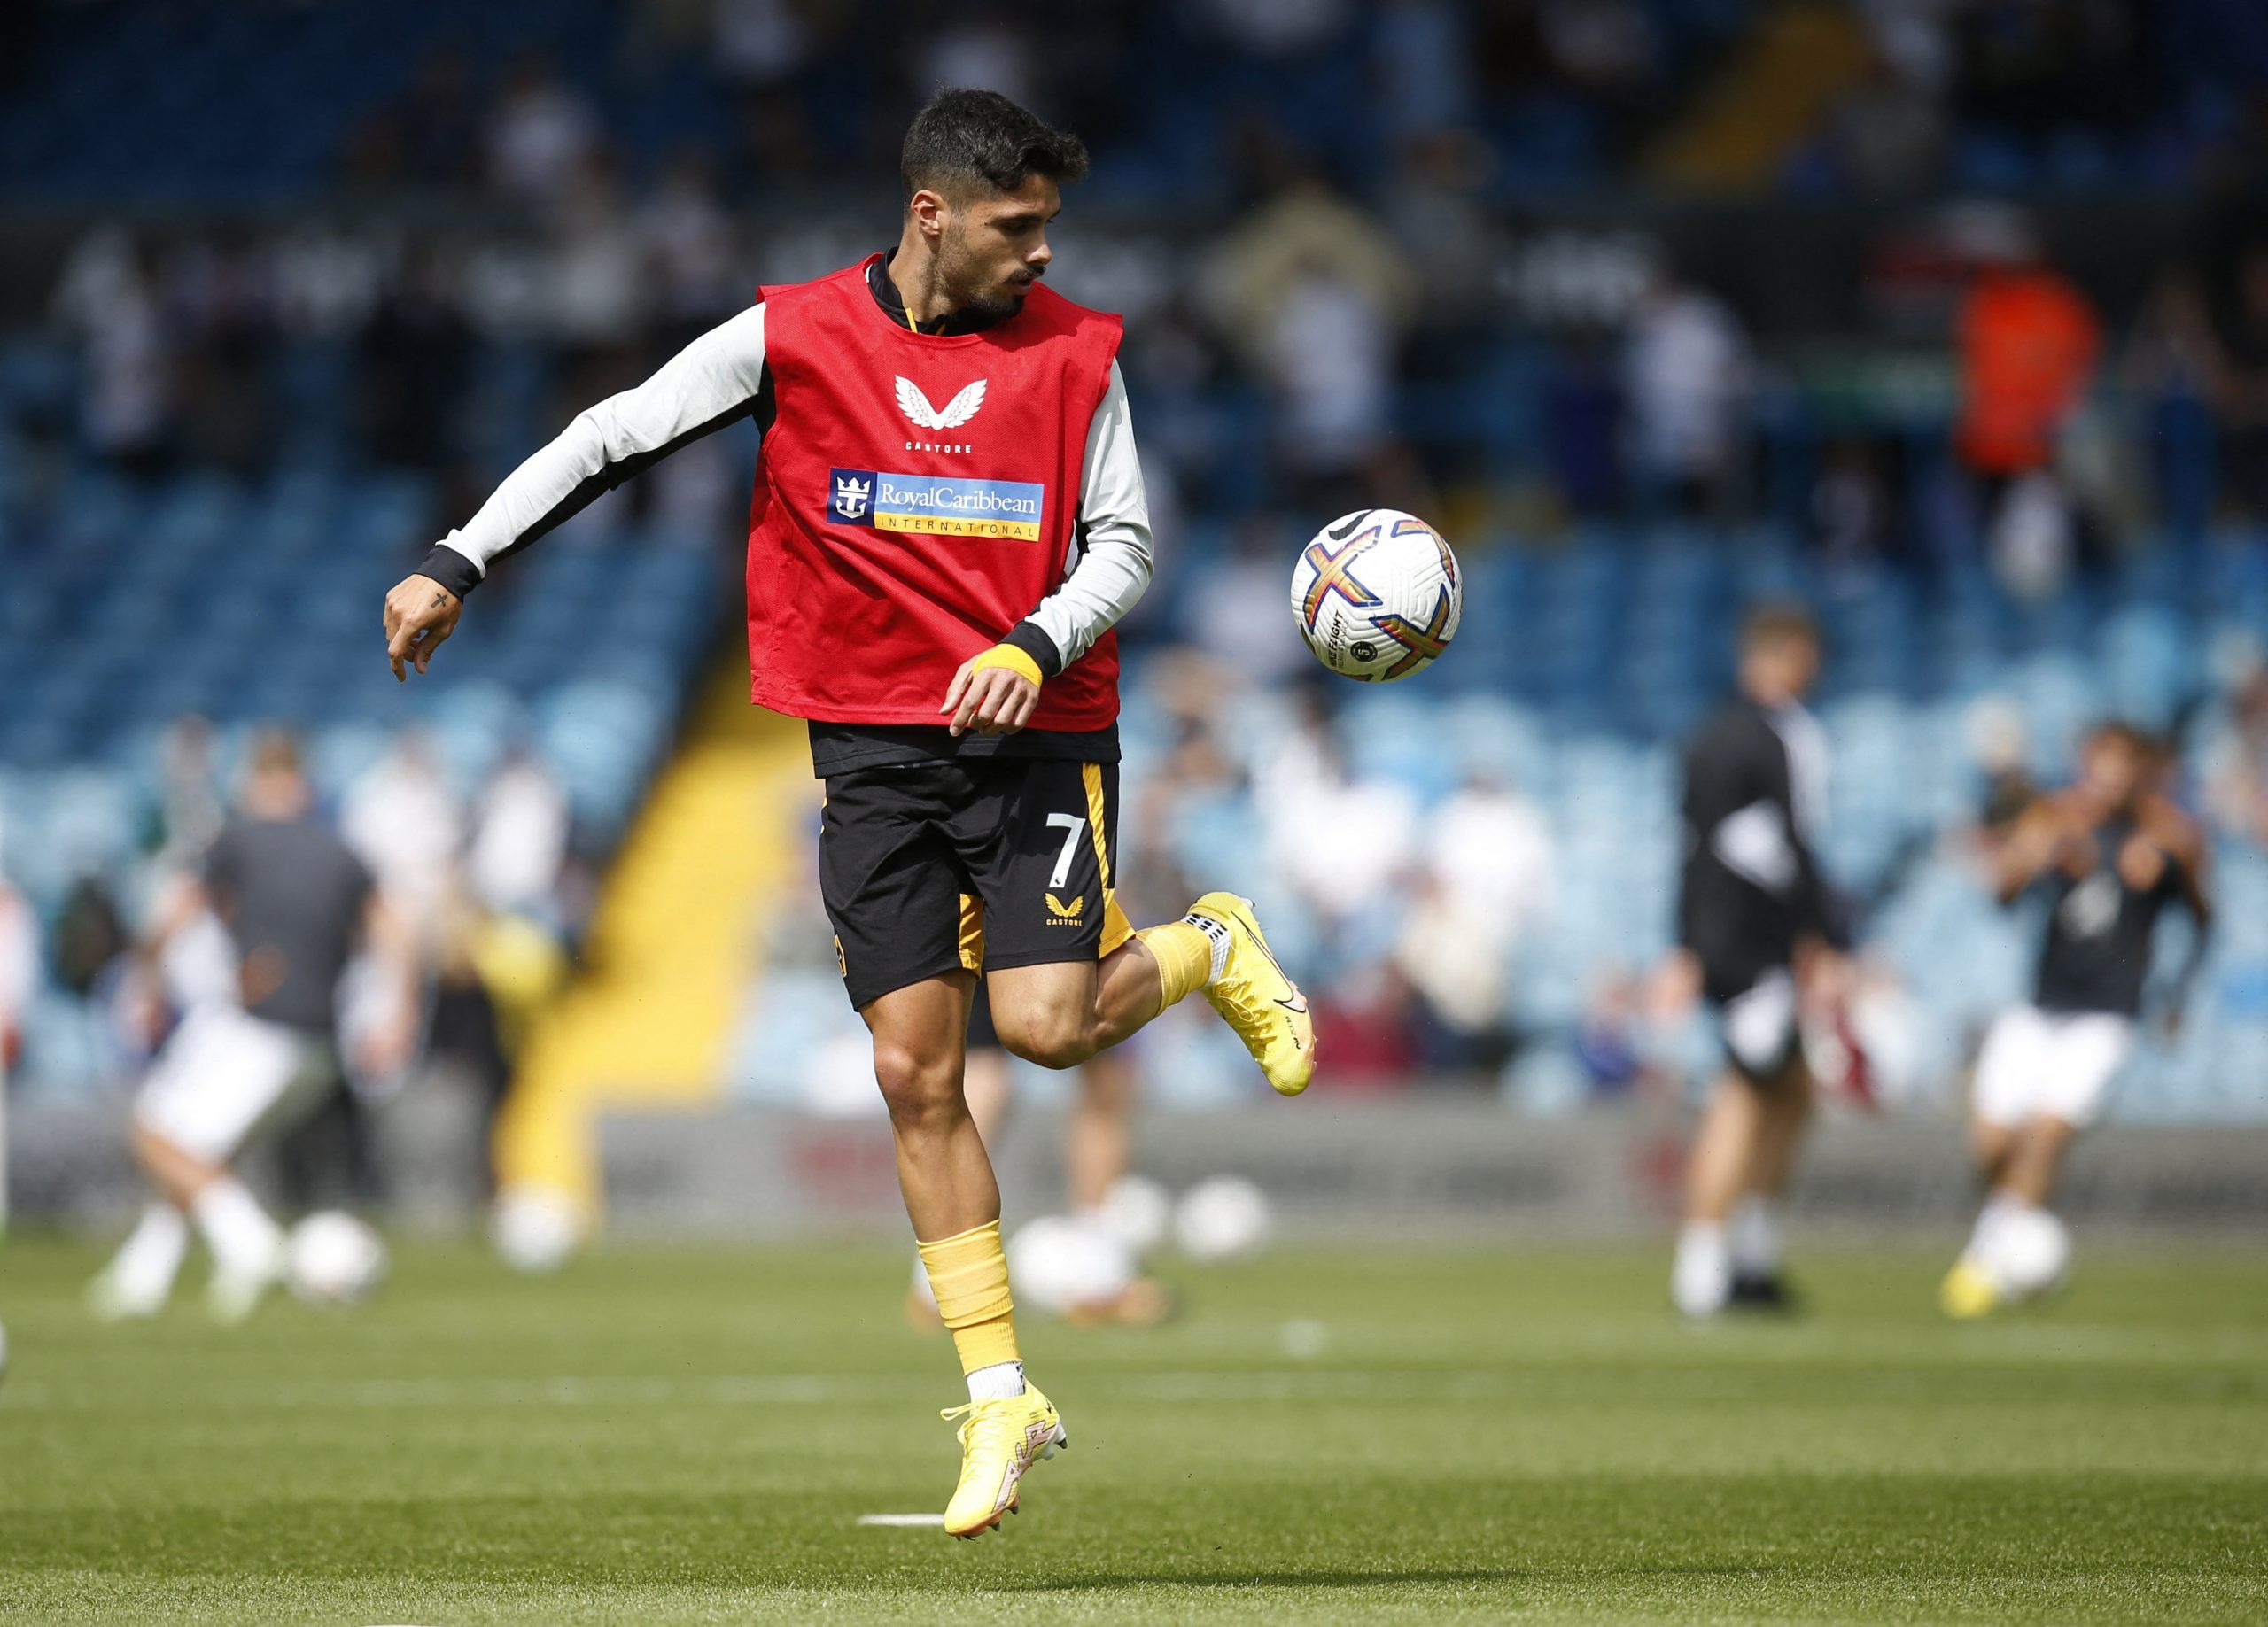 Soccer Football - Premier League - Leeds United v Wolverhampton Wanderers - Elland Road, Leeds, Britain - August 6, 2022 Wolverhampton Wanderers' Pedro Neto during the warm up before the match Action Images via Reuters/Ed Sykes EDITORIAL USE ONLY. No use with unauthorized audio, video, data, fixture lists, club/league logos or 'live' services. Online in-match use limited to 75 images, no video emulation. No use in betting, games or single club /league/player publications.  Please contact your ac